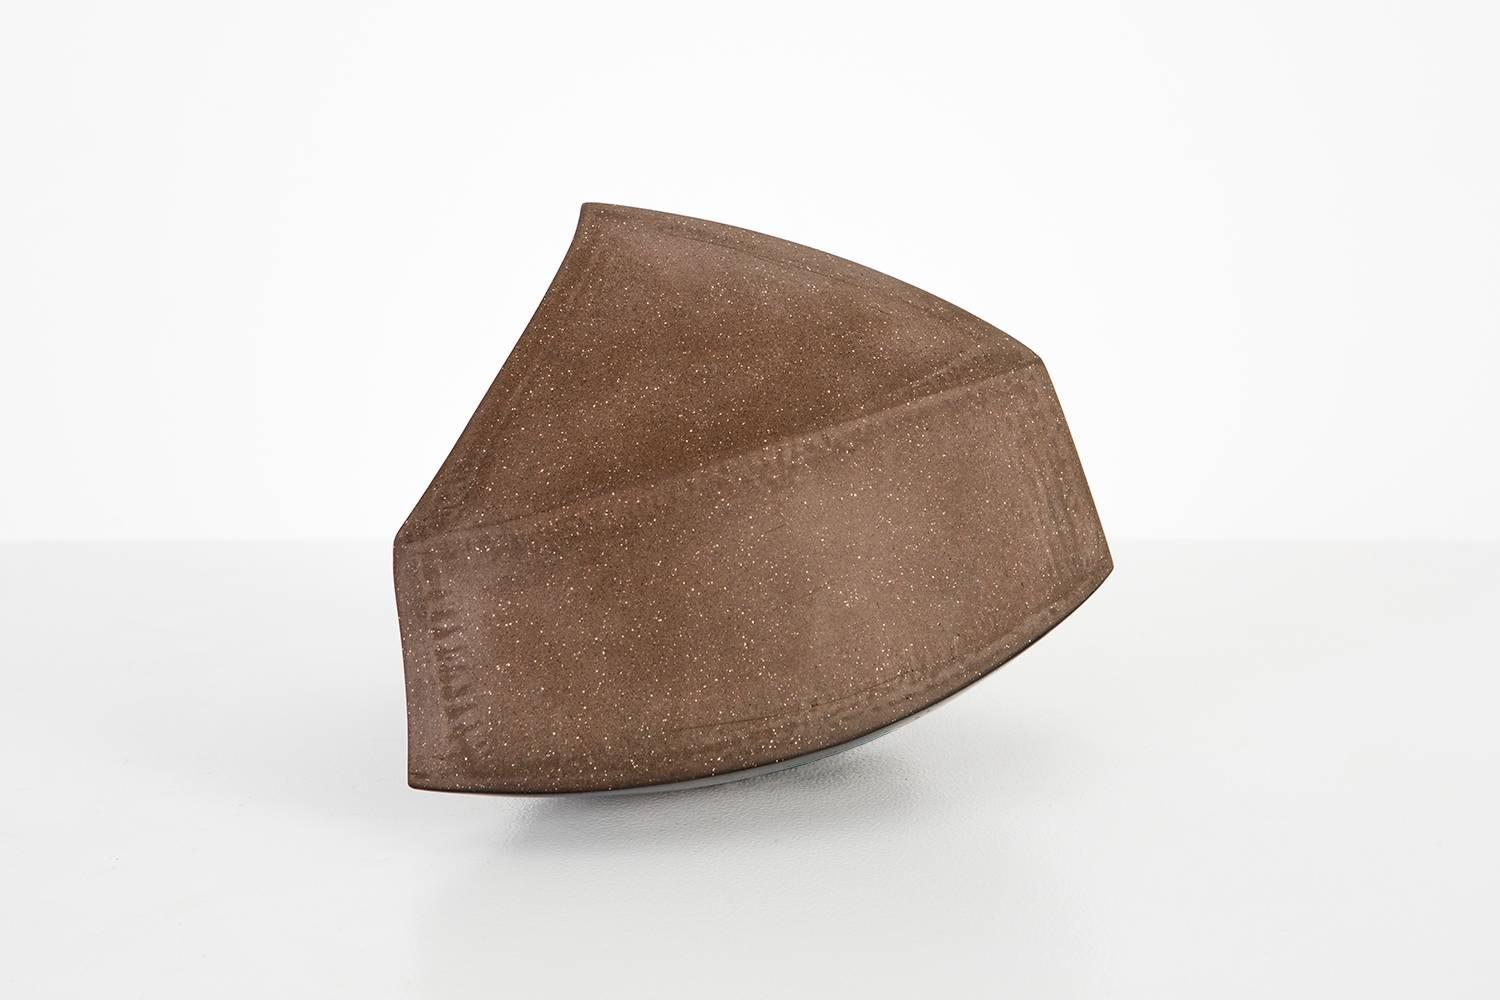 This partially glazed dark brown stoneware sculpture combines all the building block shapes of geometry. Depending on the point of view, this sculpture appears triangular, circular or square. Despite its geometric quality, it maintains an organic